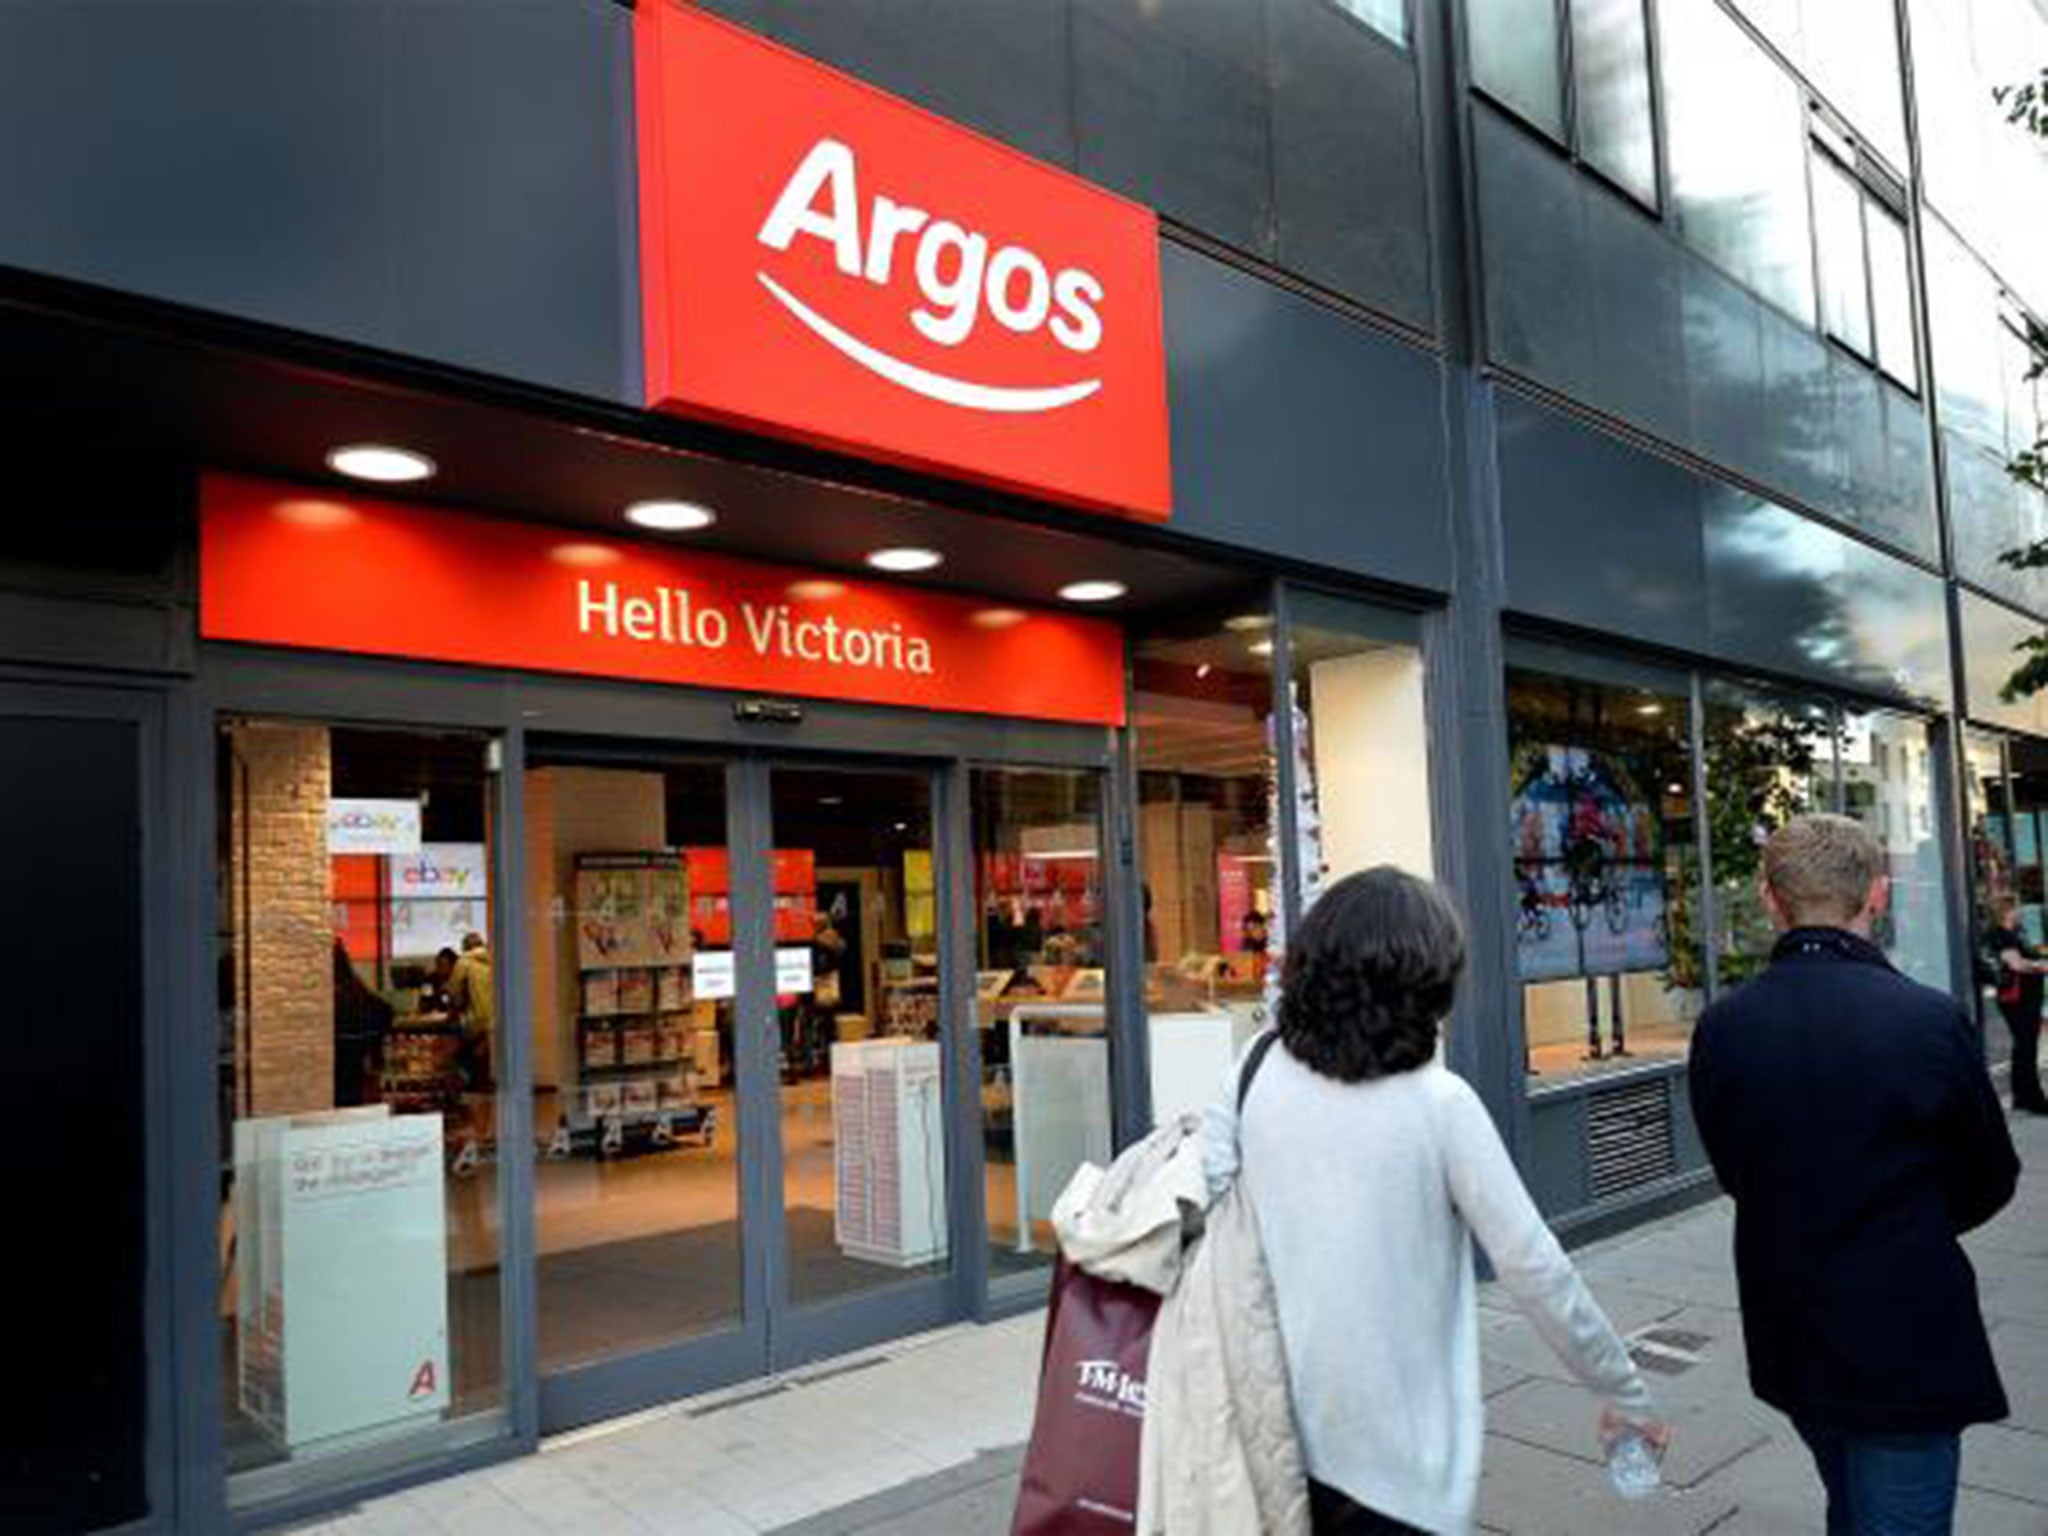 Sainsbury's bid for the Argos owner Home Retail Group has been gatecrashed by the South African furniture seller Steinhoff